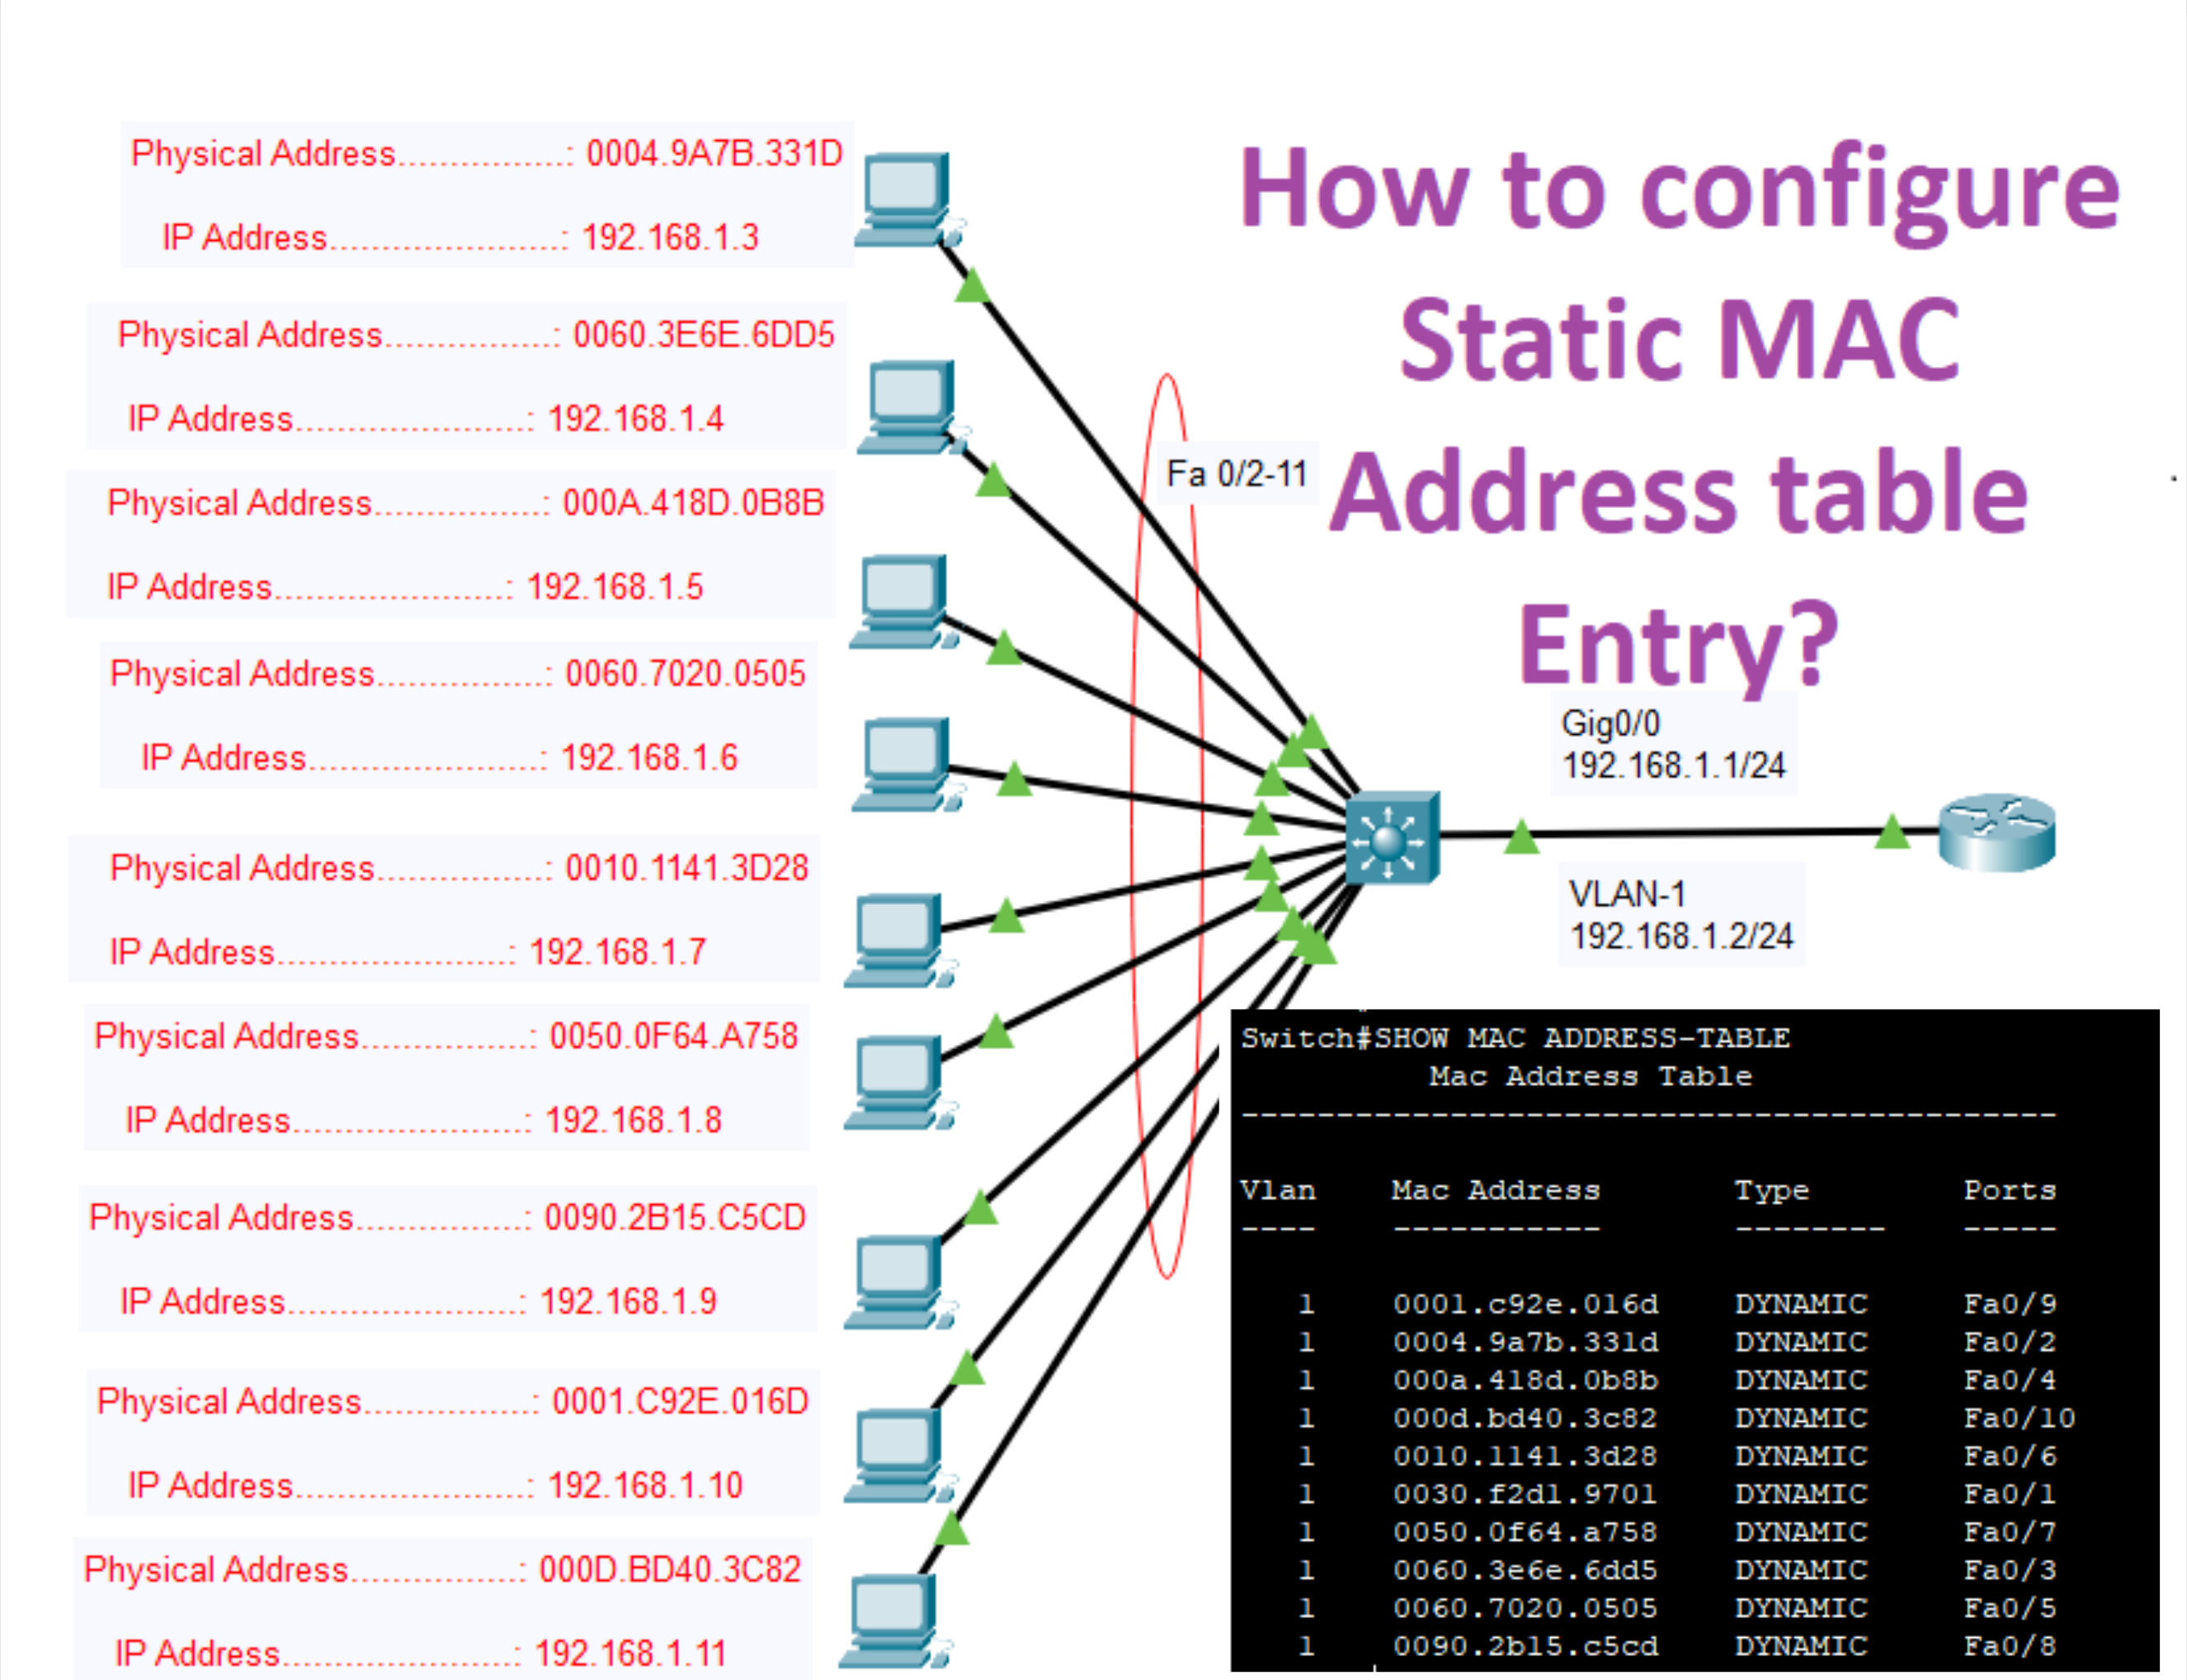 assign static mac address to each network team